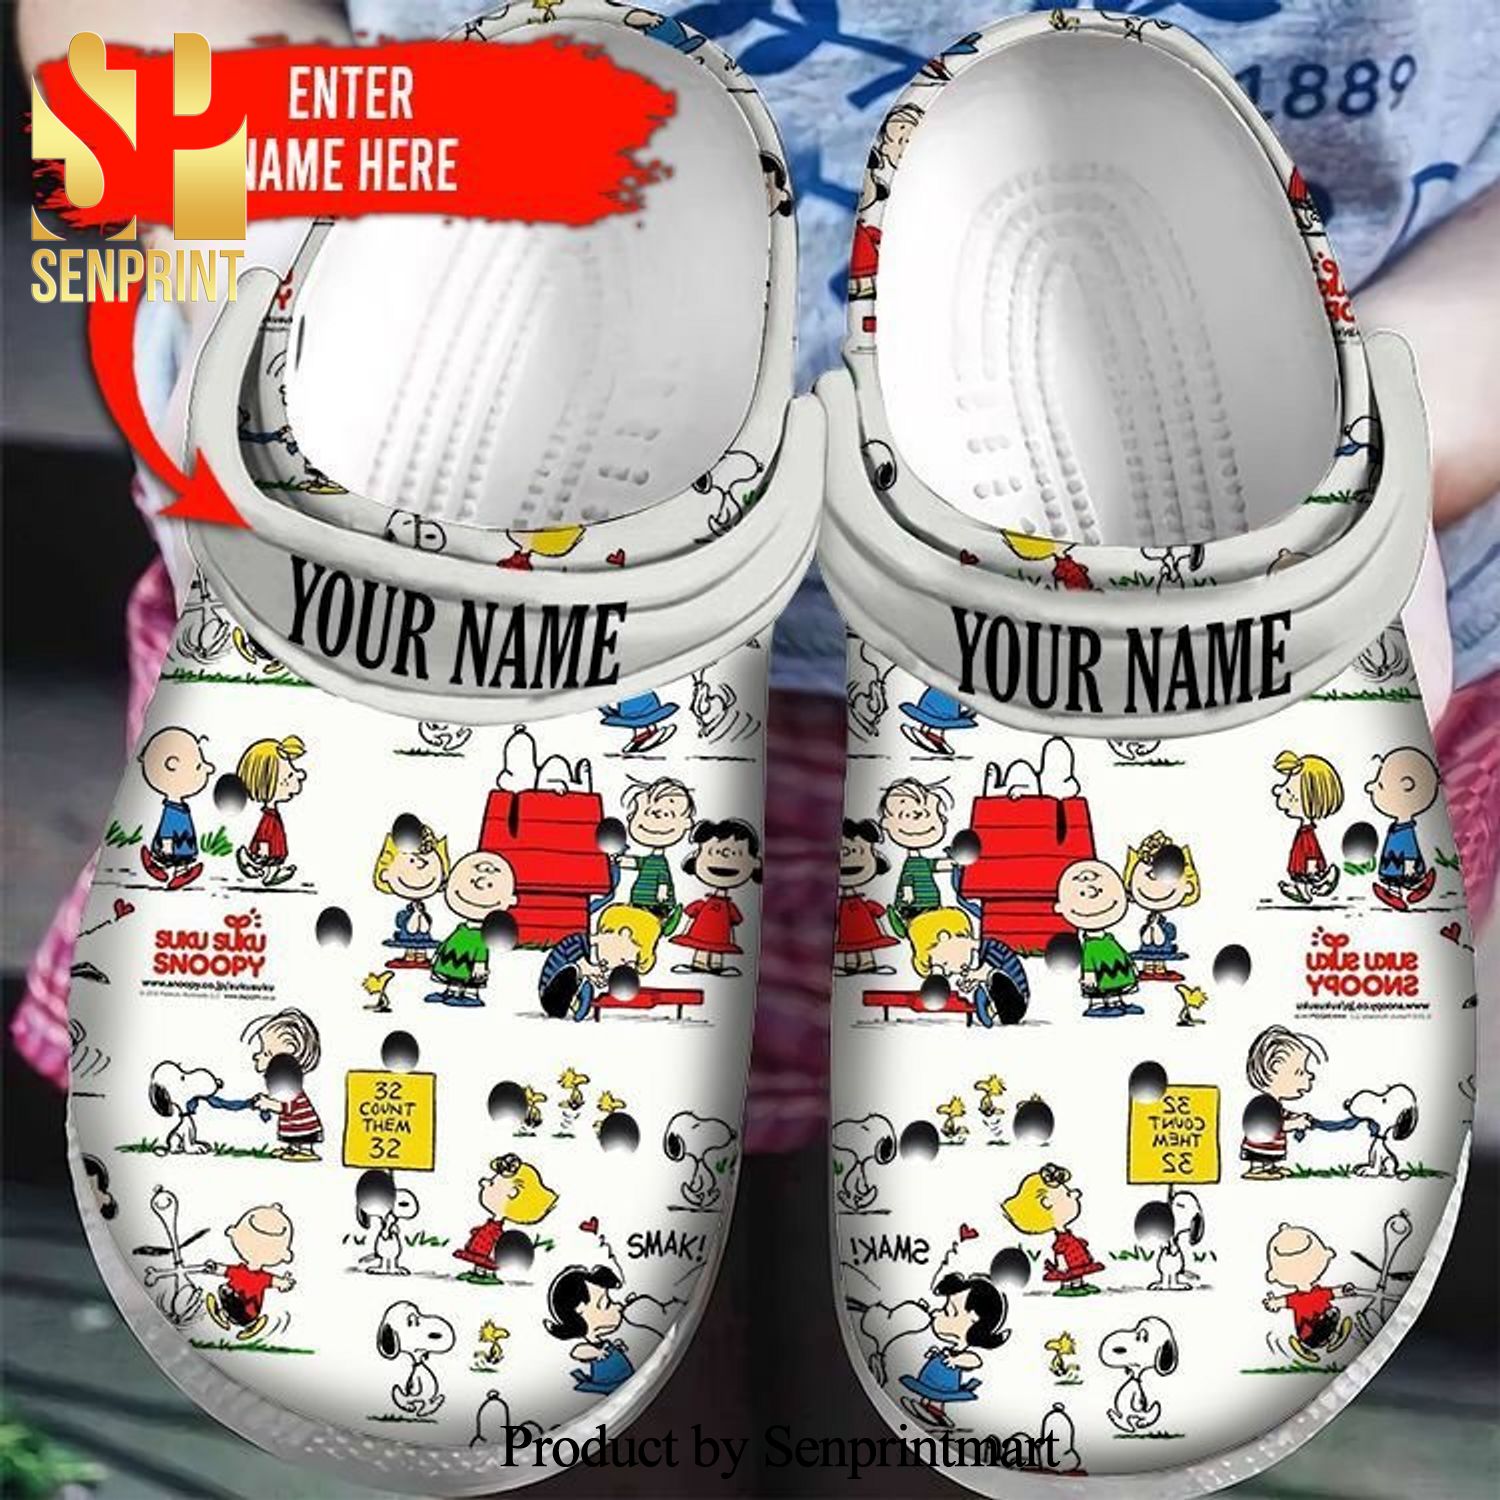 Woodstock Snoopy Peanuts Gift For Fan Classic Water New Outfit Crocs Unisex Crocband Clogs